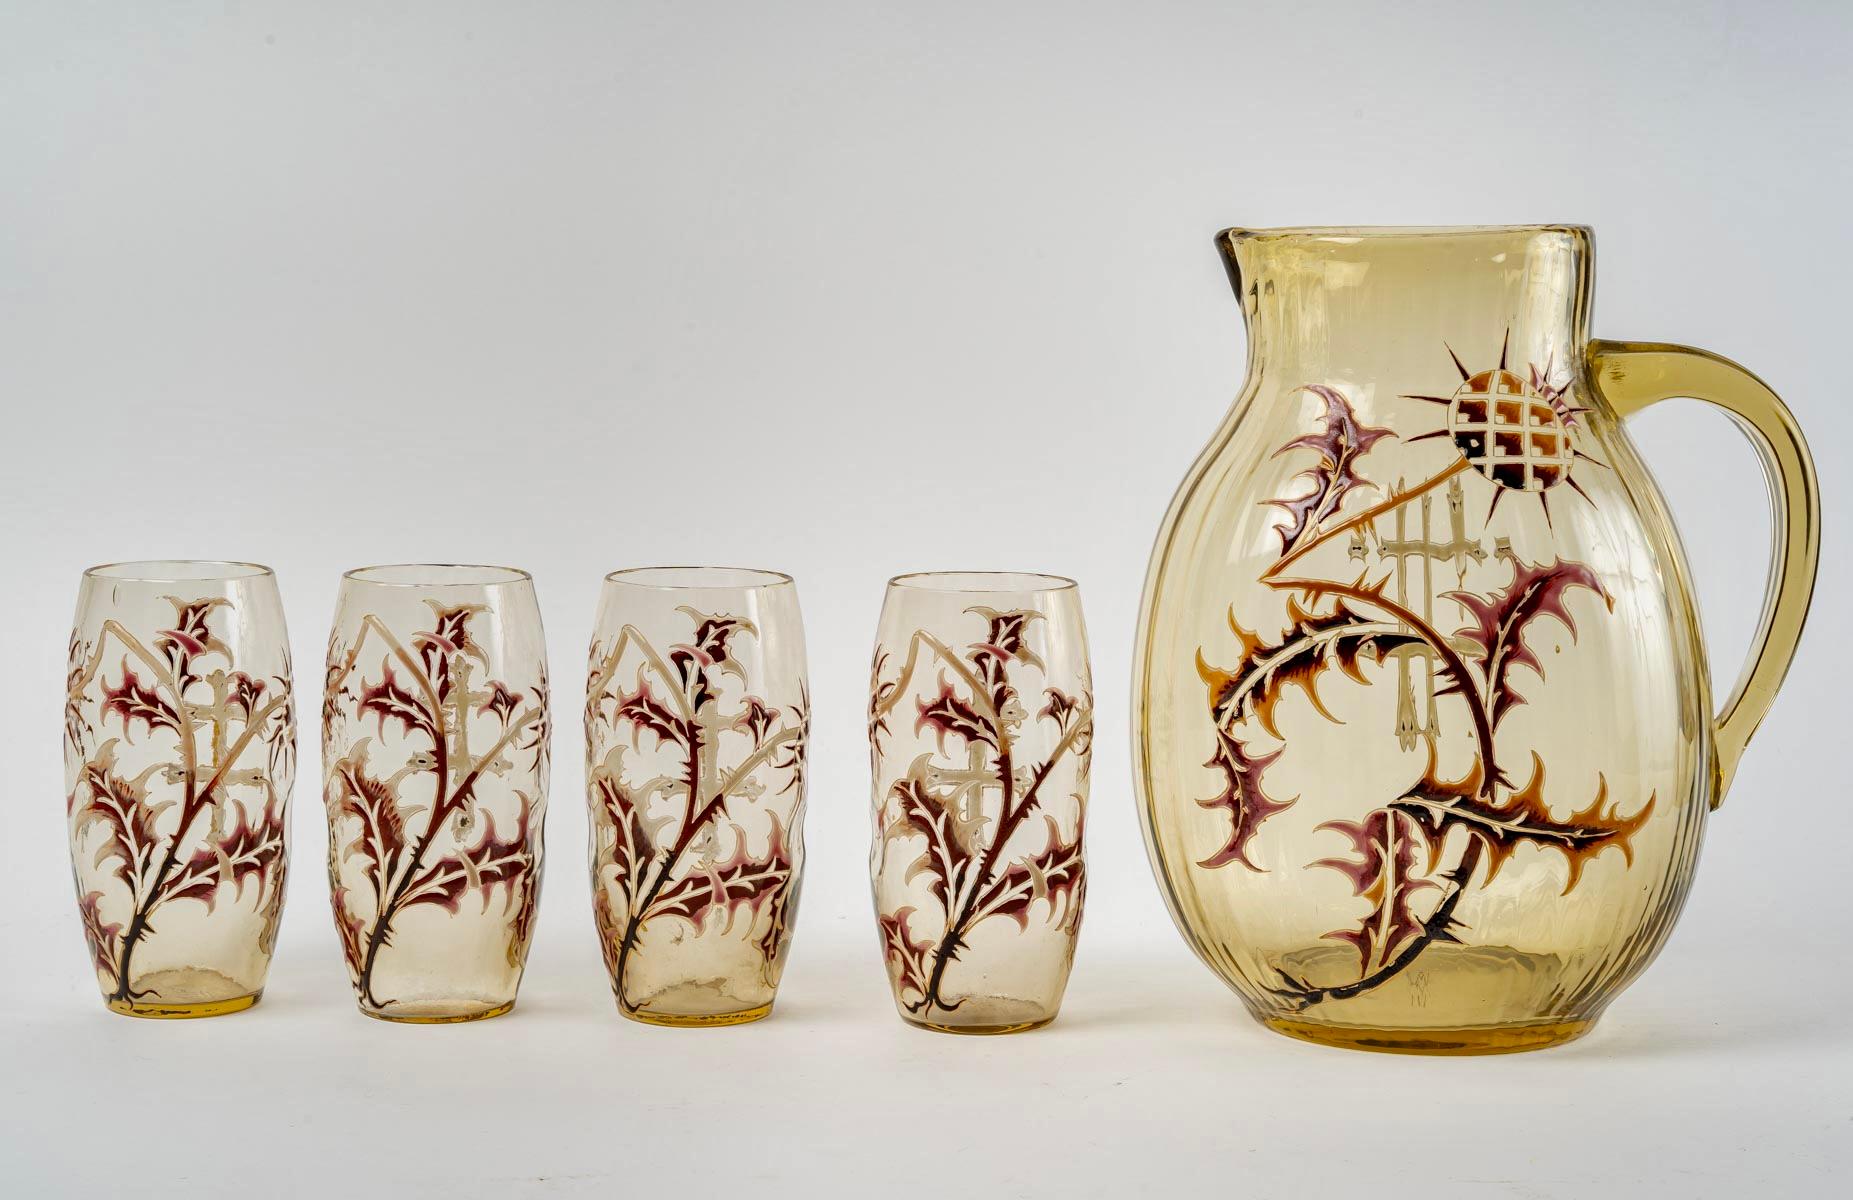 Orangeade set “Chardons” made in amber yellow glass with enamel design of thistles by Émile Gallé.
Each piece is signed “E.Gallé”.

All parts are in perfect condition. The carafe is gadrooned and the glasses are hammered with three points sunk on